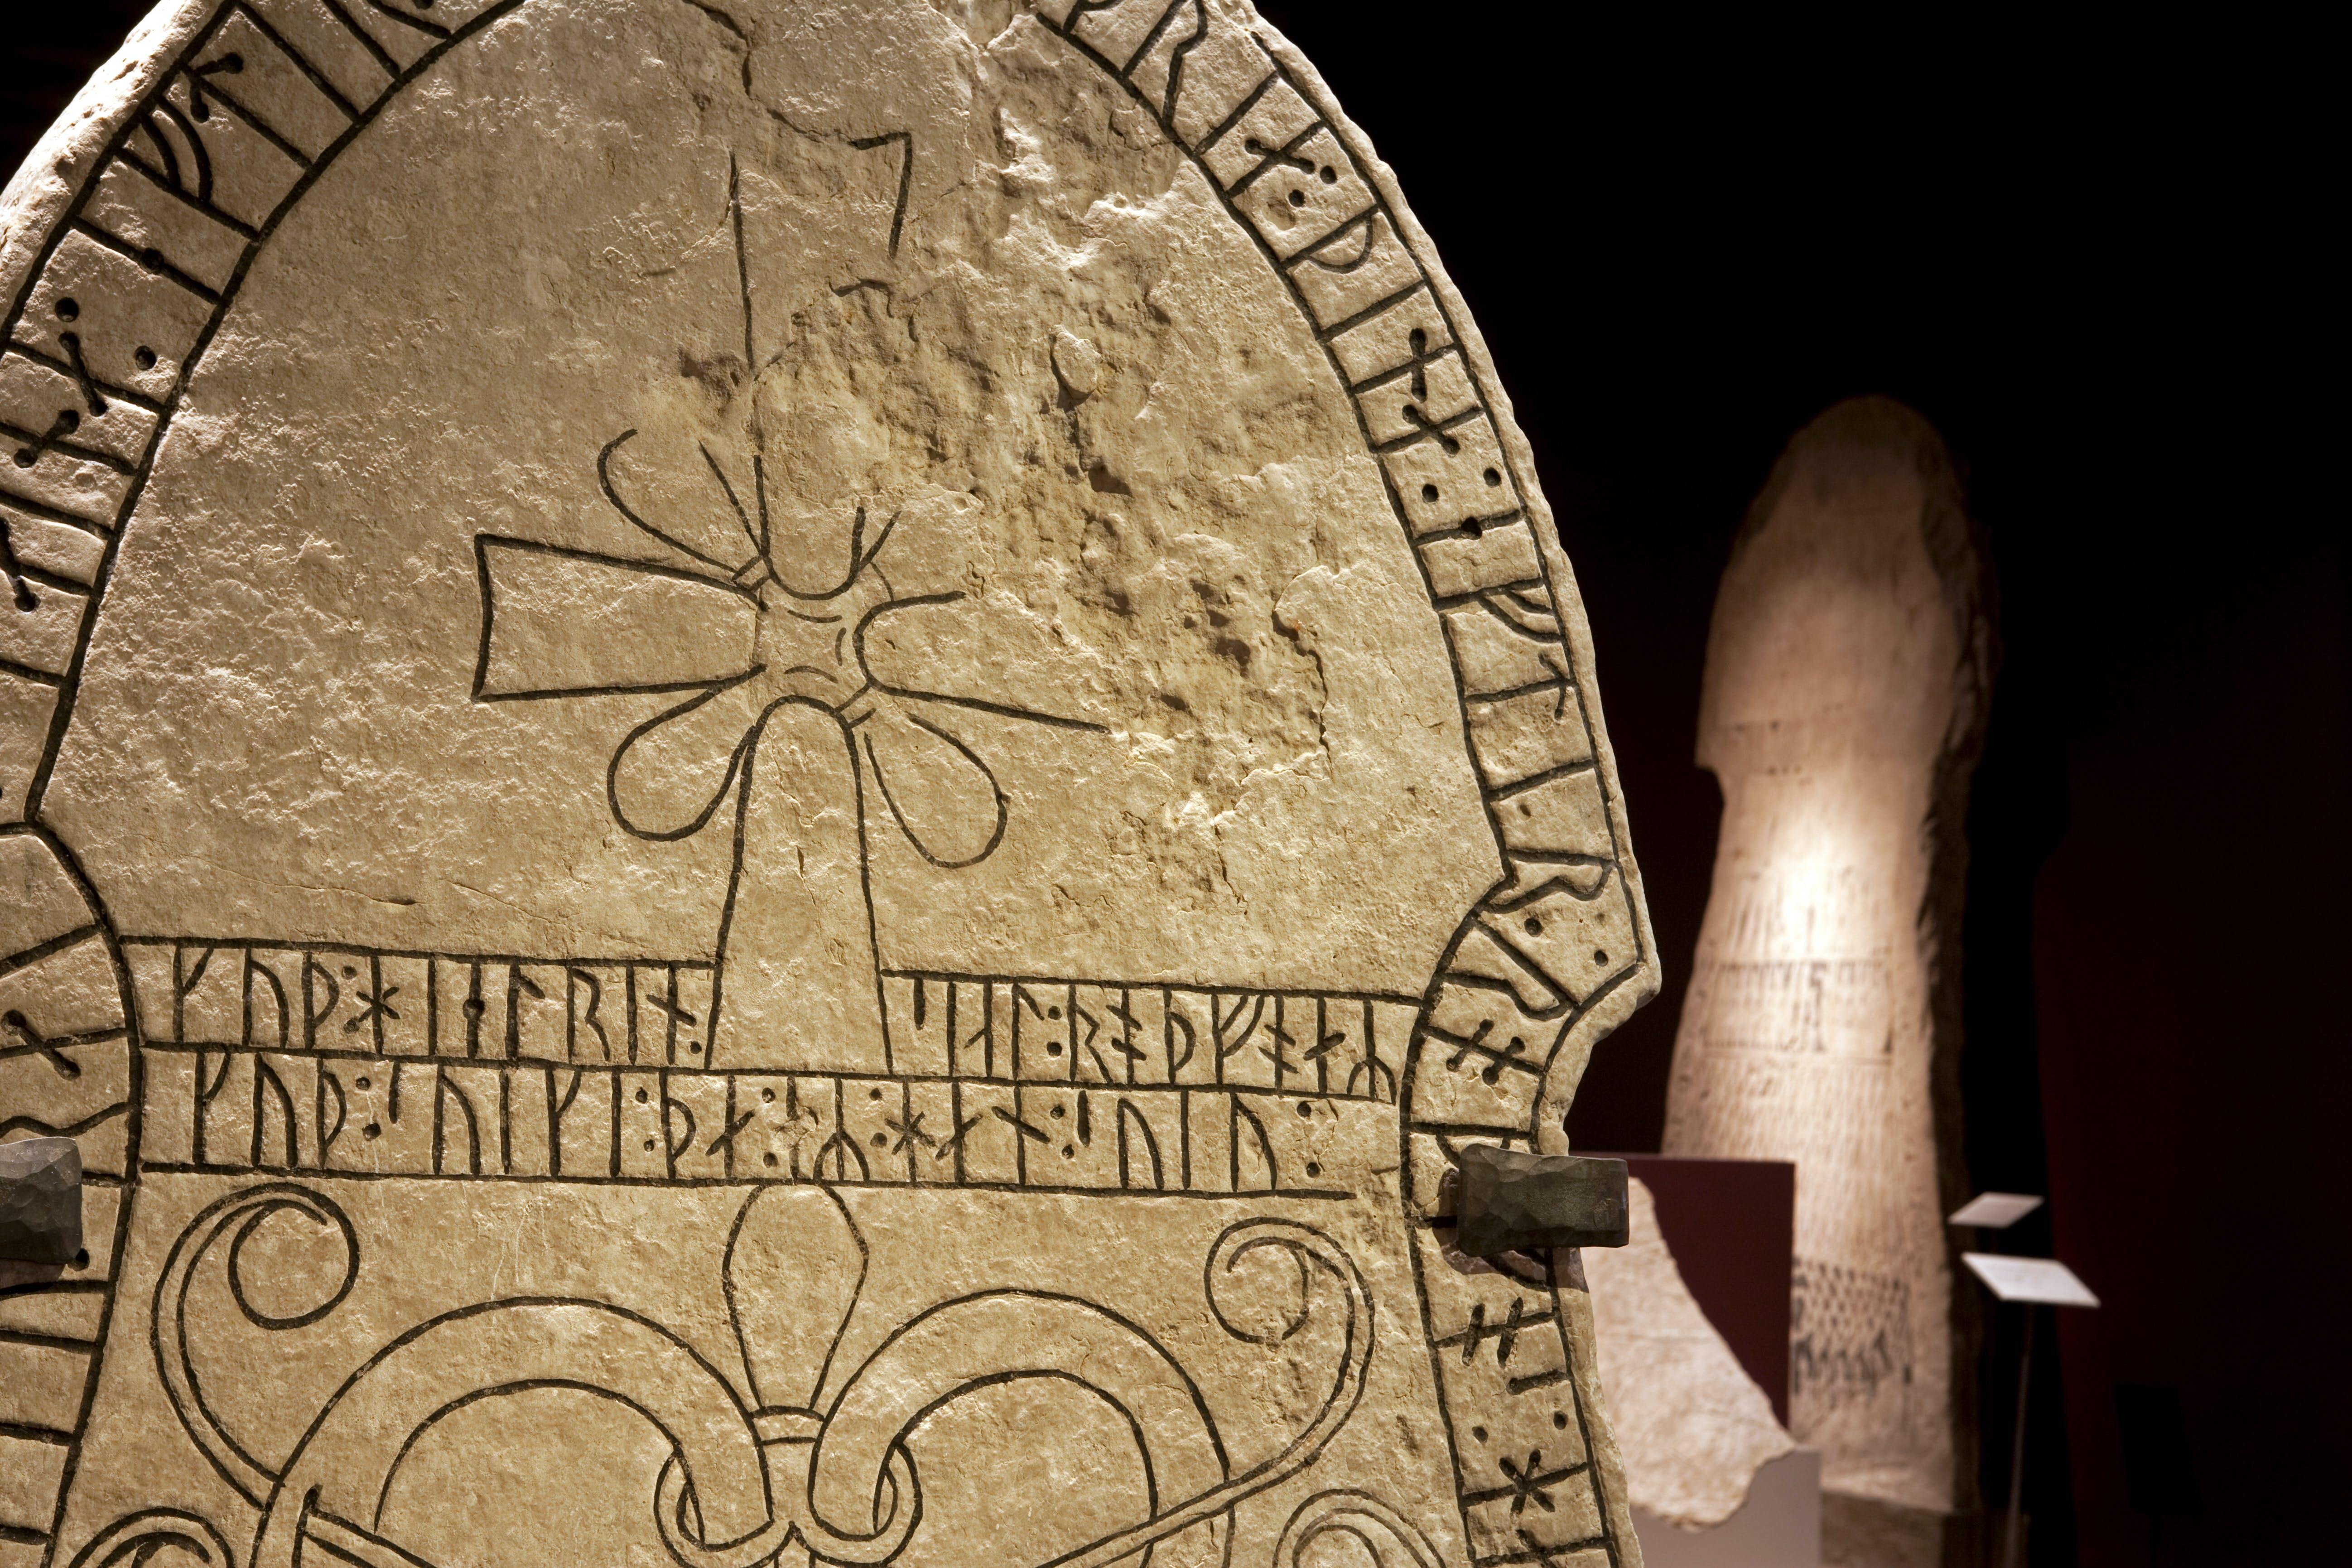 Sweden, Island of Gotland, Visby. Detail from Viking carved rune stones in the Historical Museum of Gotland